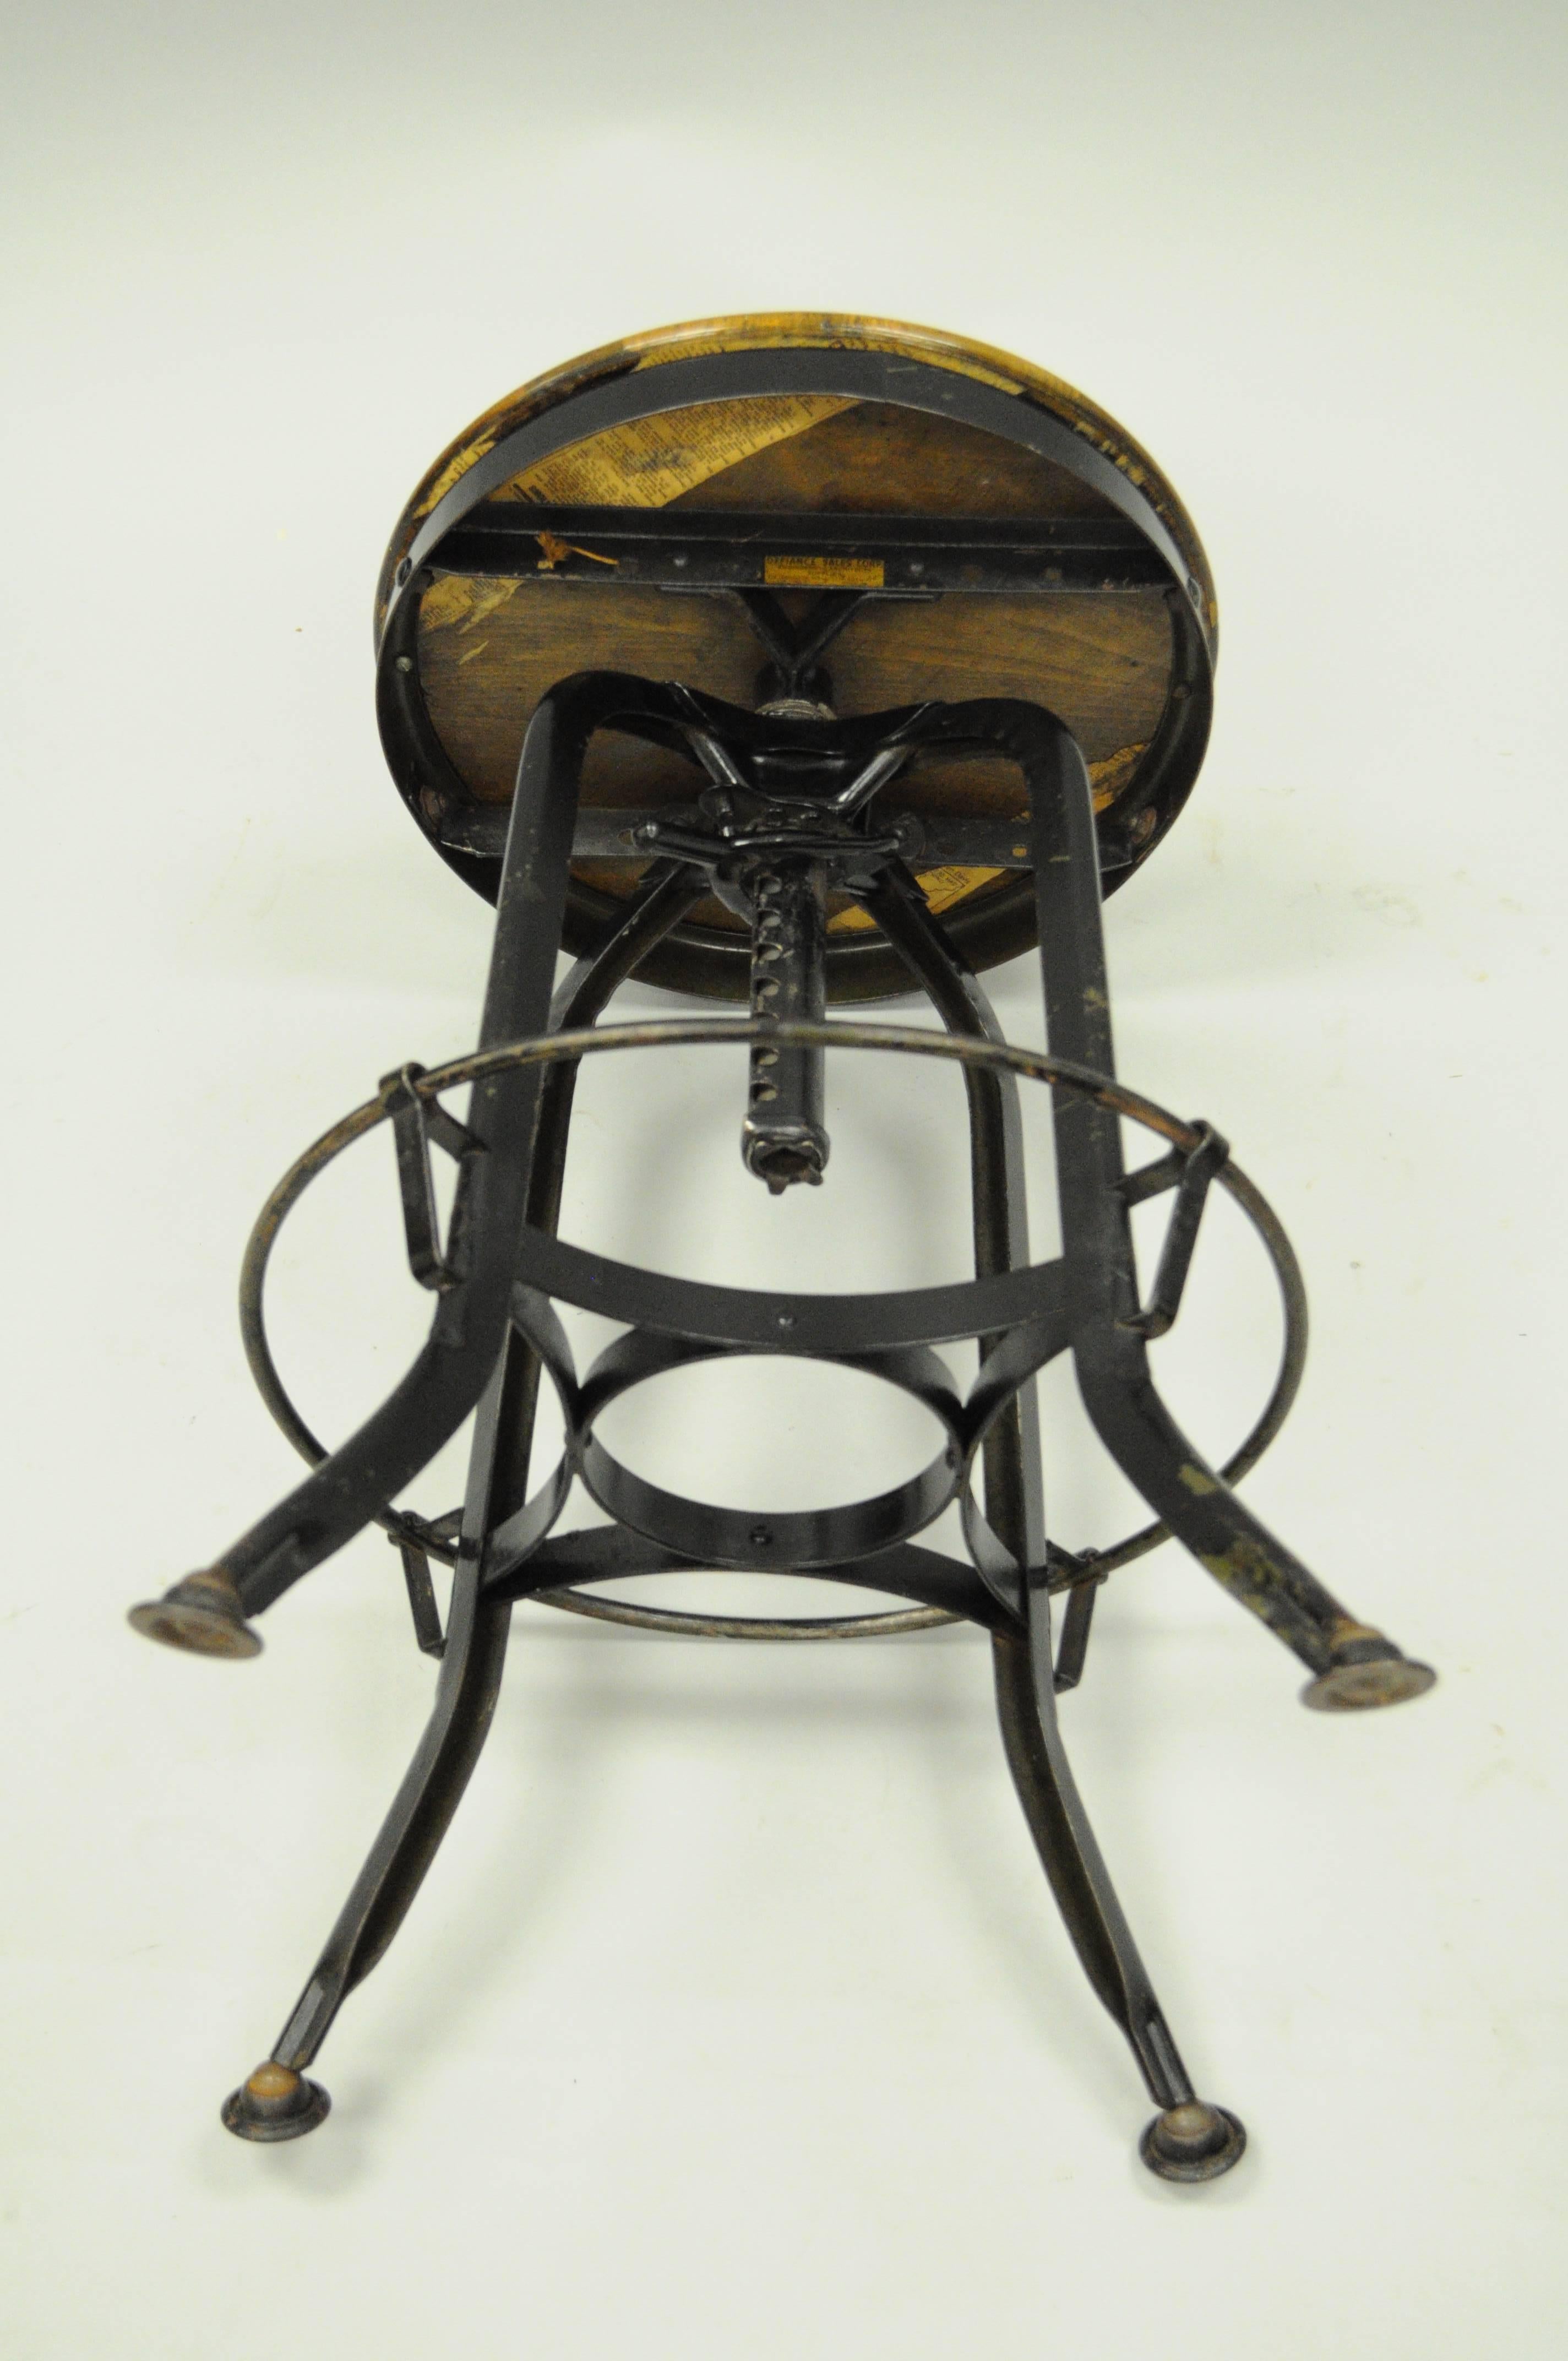 20th Century Defiance Wood and Metal Architect Draftsman Stool Drafting Swivel Chair